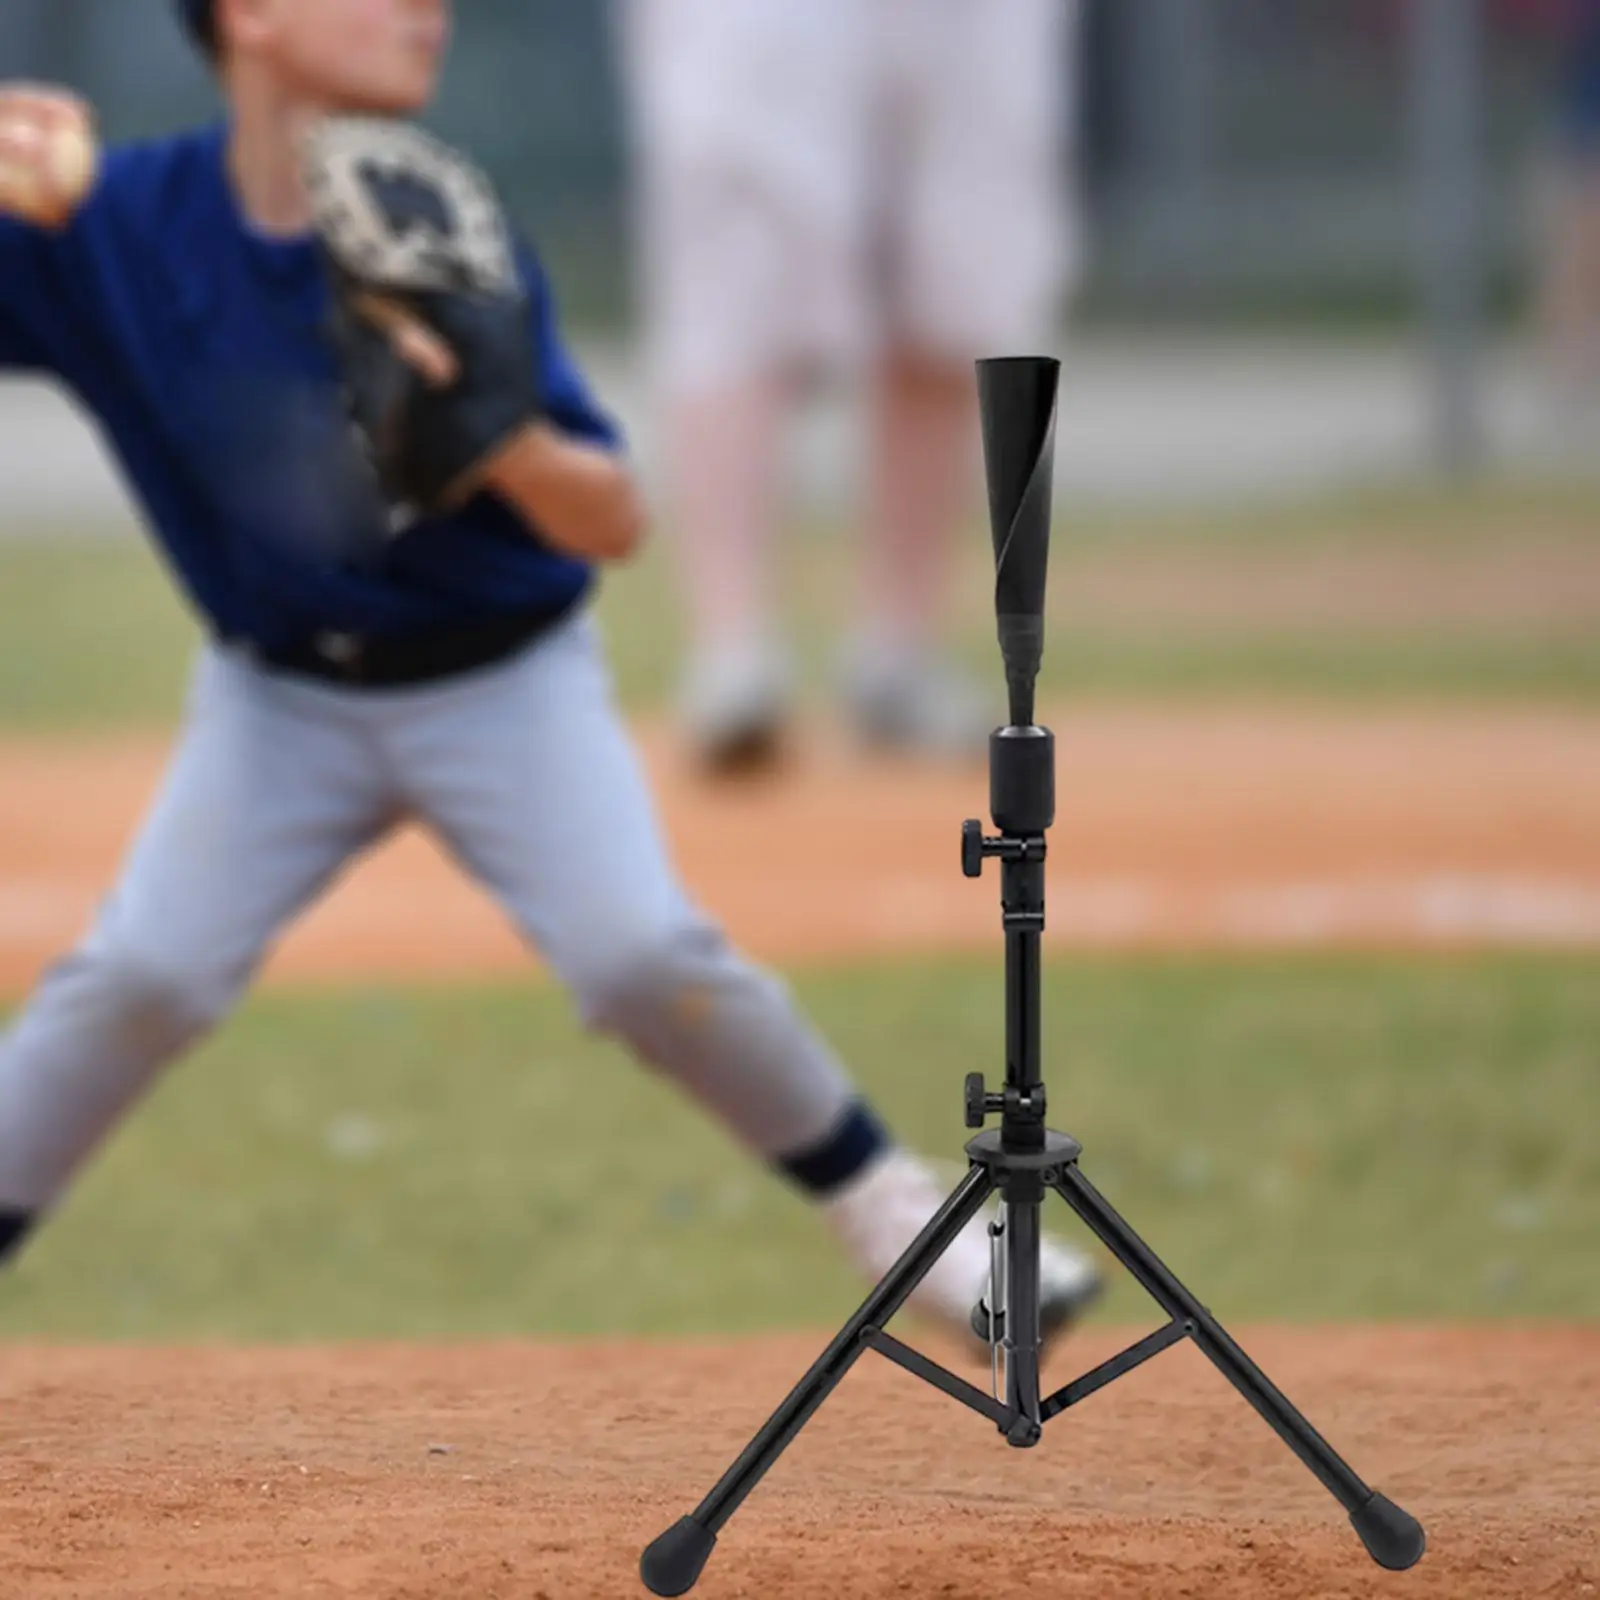 Baseball Batting Tee Training Aid Adjustable Height 27 to 41 Inches Tee Stand for Indoor Beginner Outdoor Lunging Pitching Balls